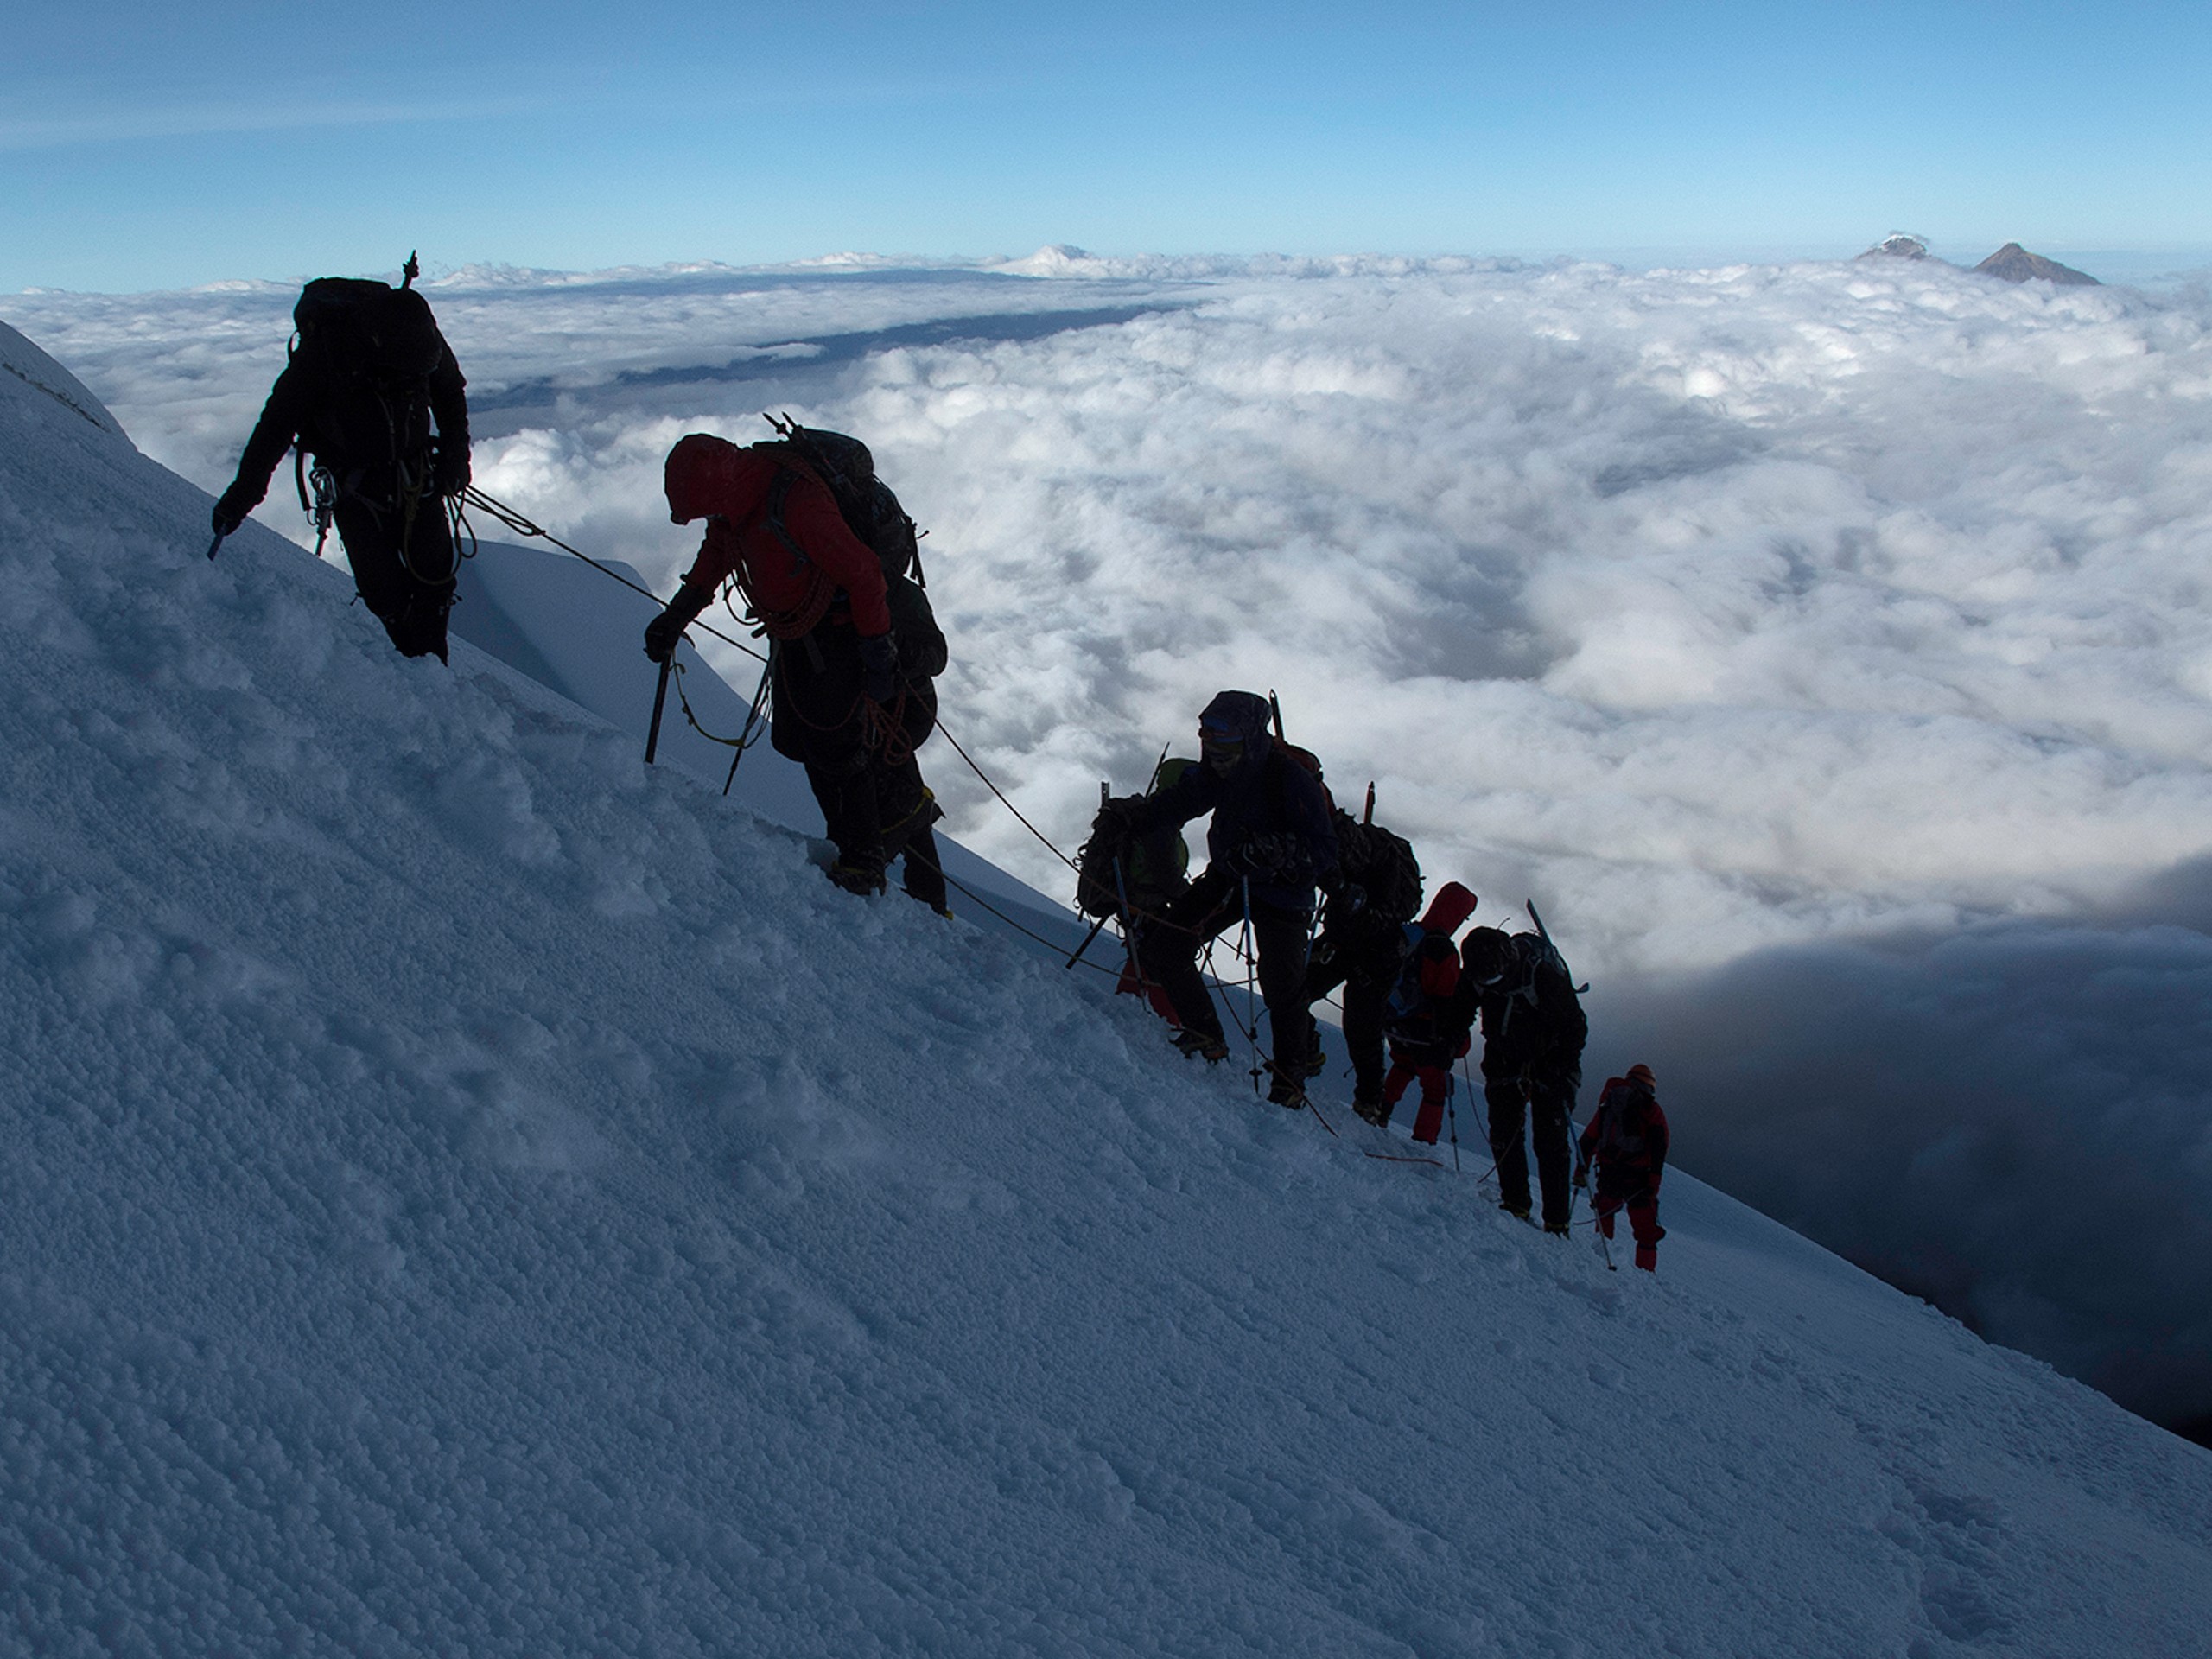 Group of climbers ascending on one of the peaks in Ecuador